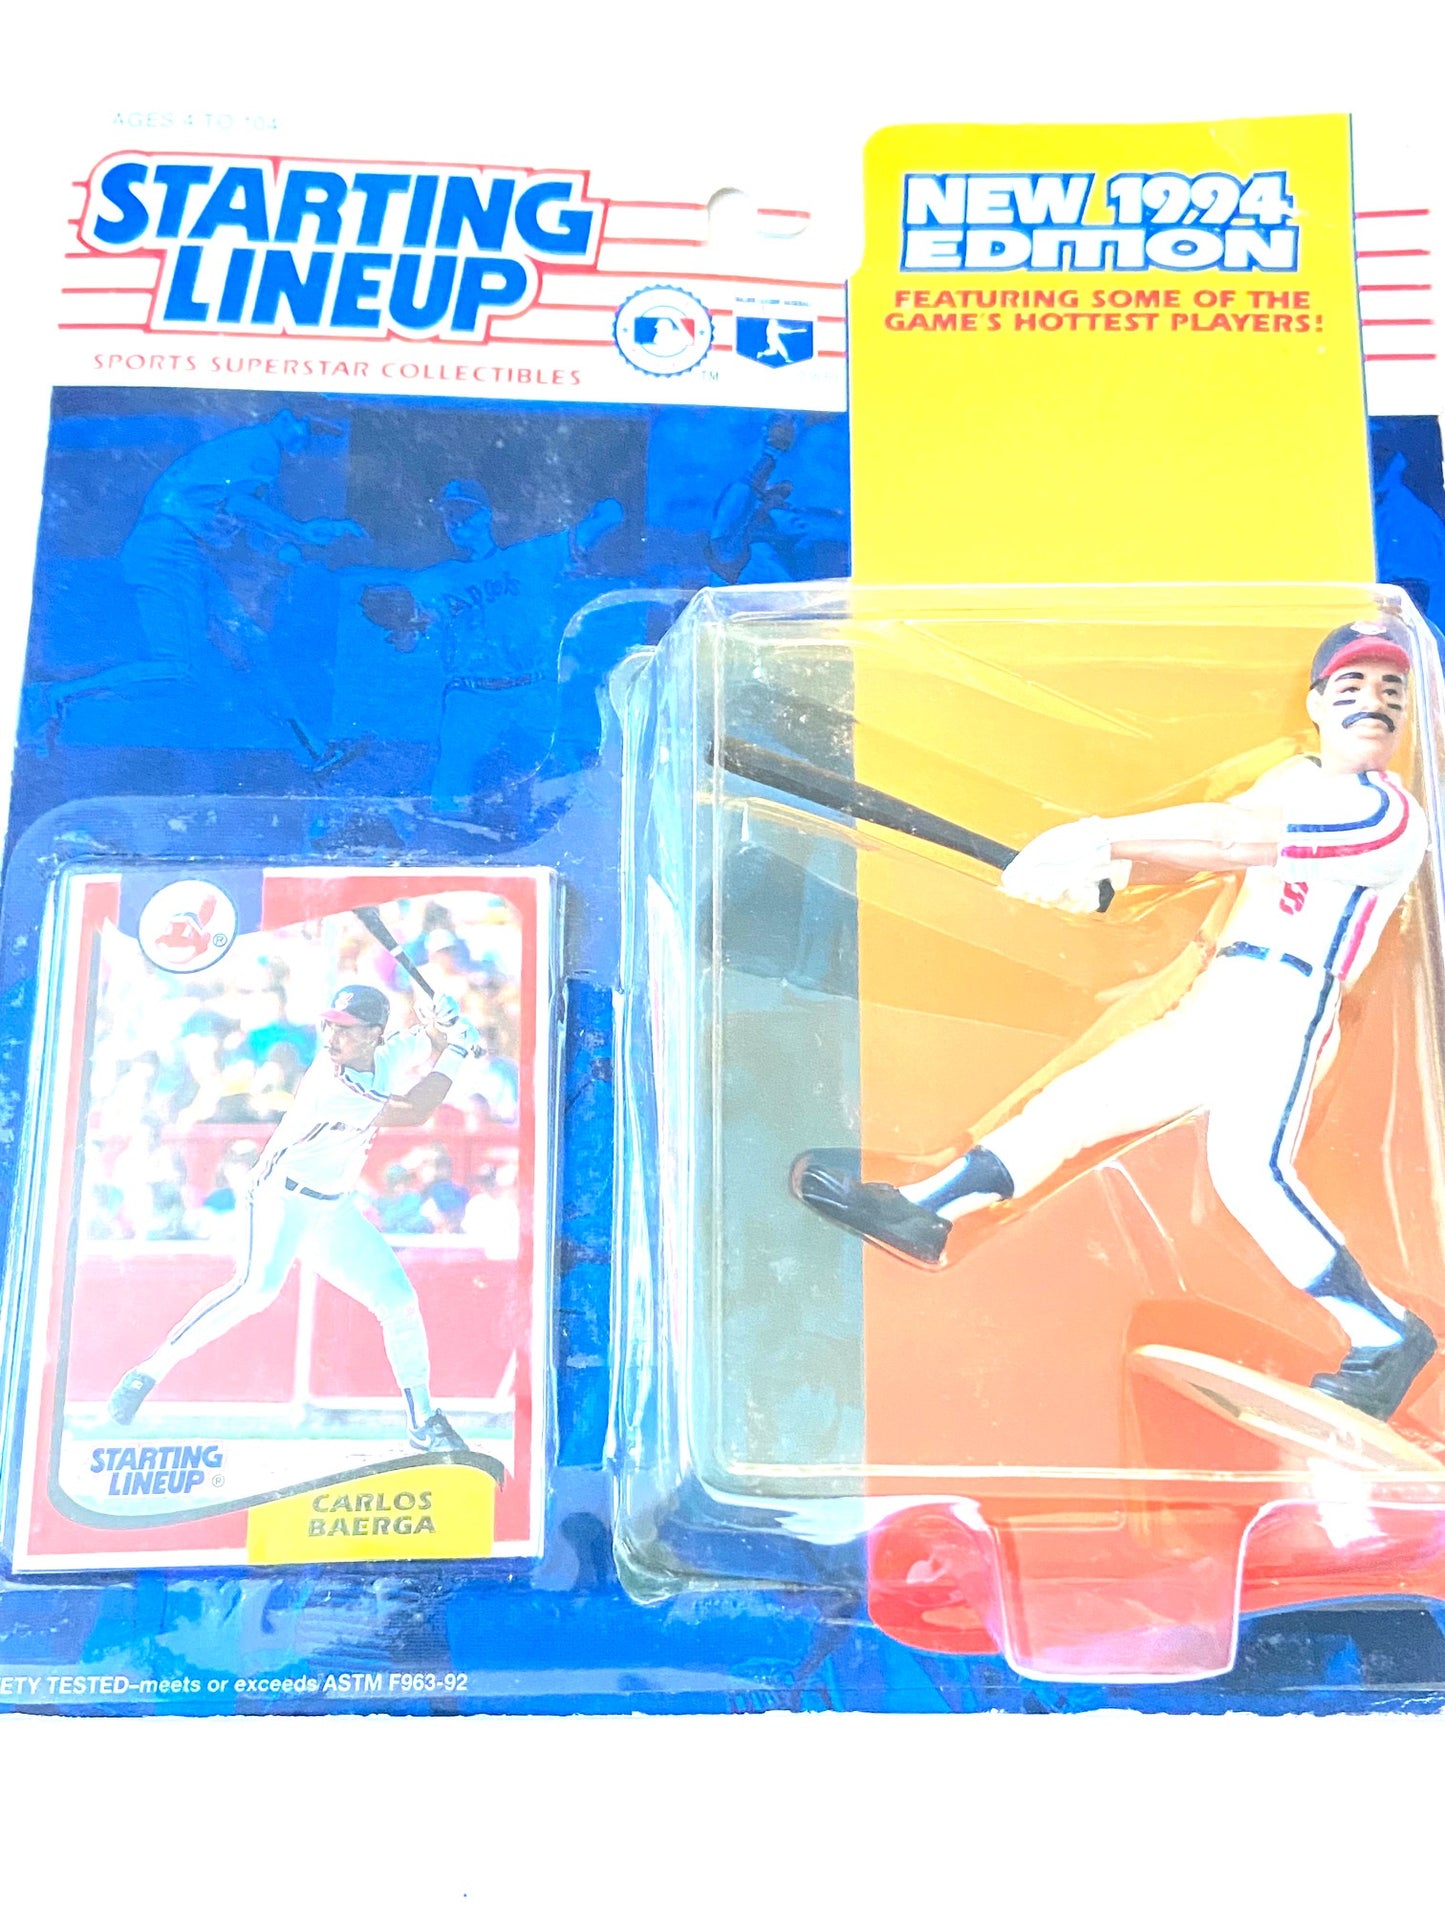 Carlos Baerga 1994 Cleveland Indians MLB Starting Lineup Figure by Kenner